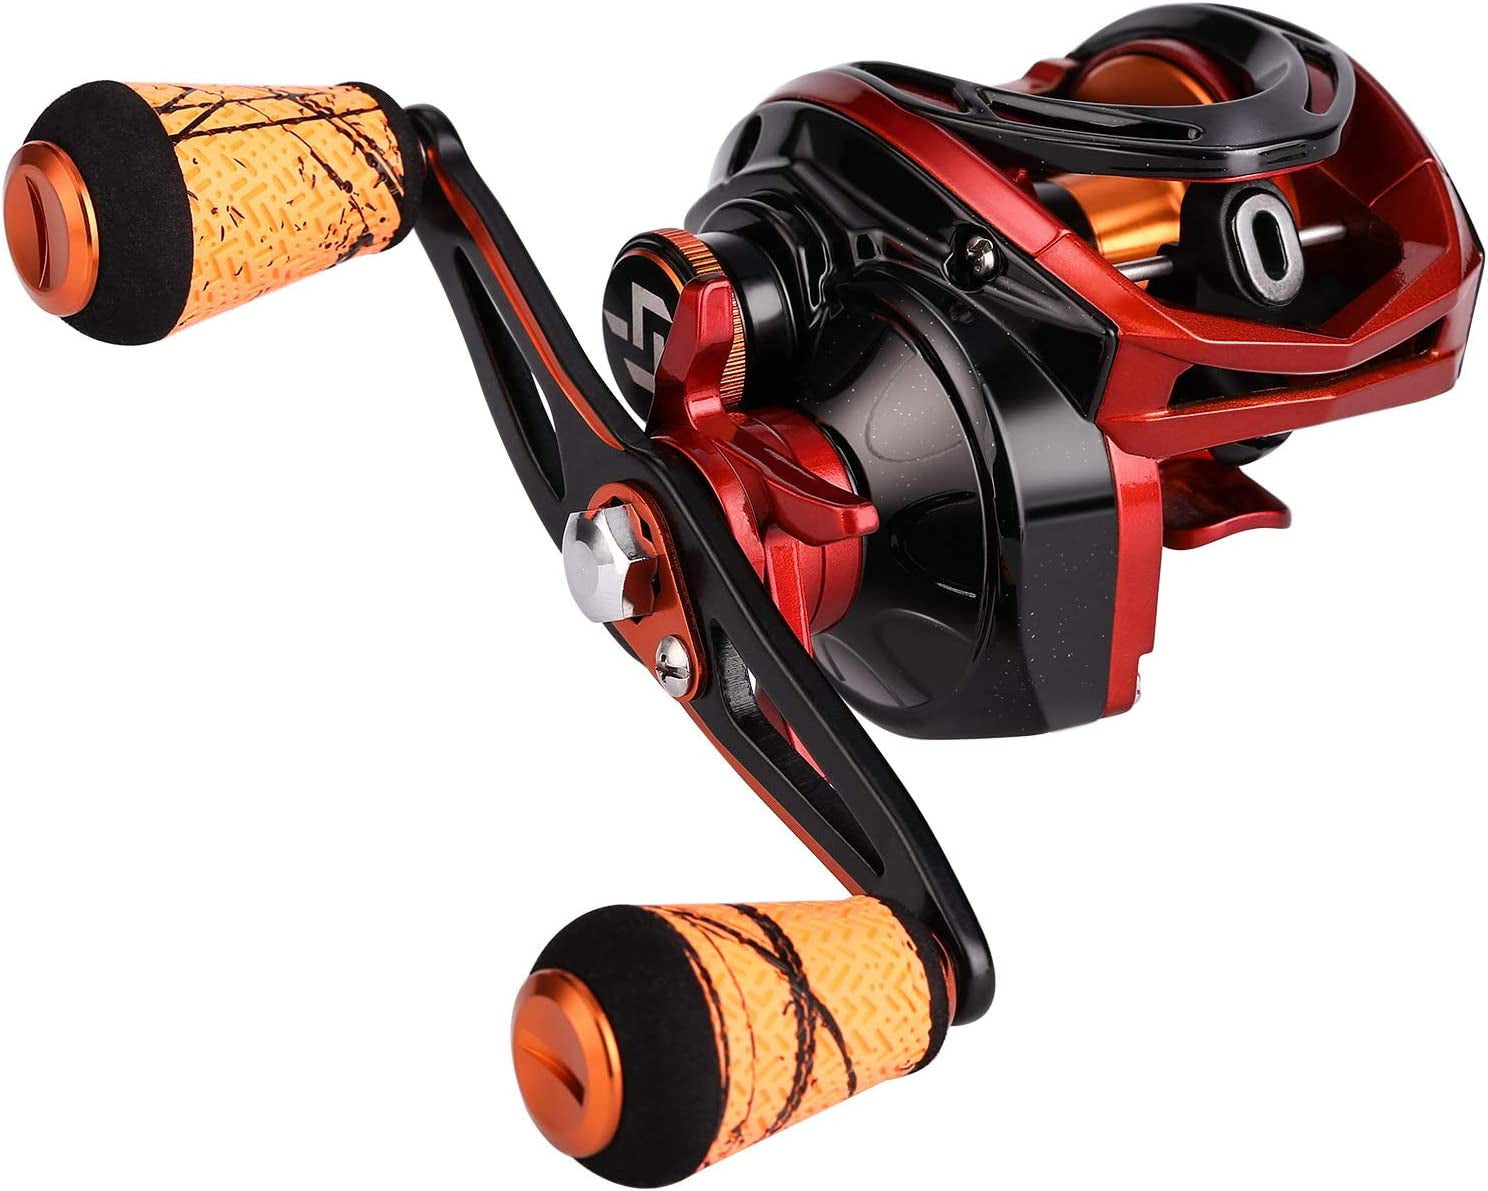 Fishing Baitcasting Reels, 7.3:1 Gear Ratio Fishing Reels , Low Profile Reel with Magnetic Braking System , Super Polymer Grips,Carbon Infused Nylon Frame